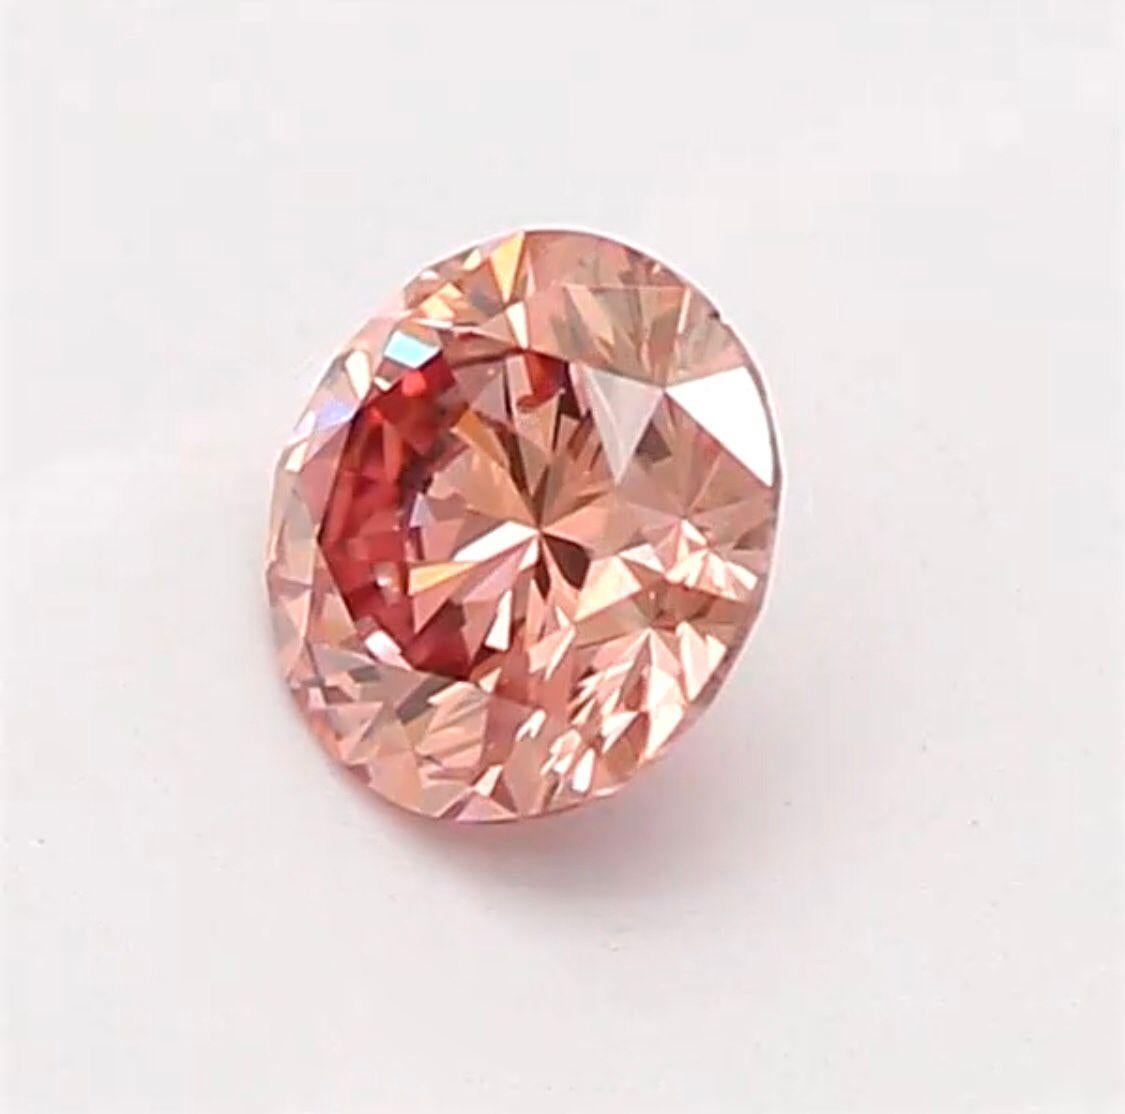 0.15 Carat Fancy Orangy Pink Round Shaped Diamond SI2 Clarity CGL Certified For Sale 2